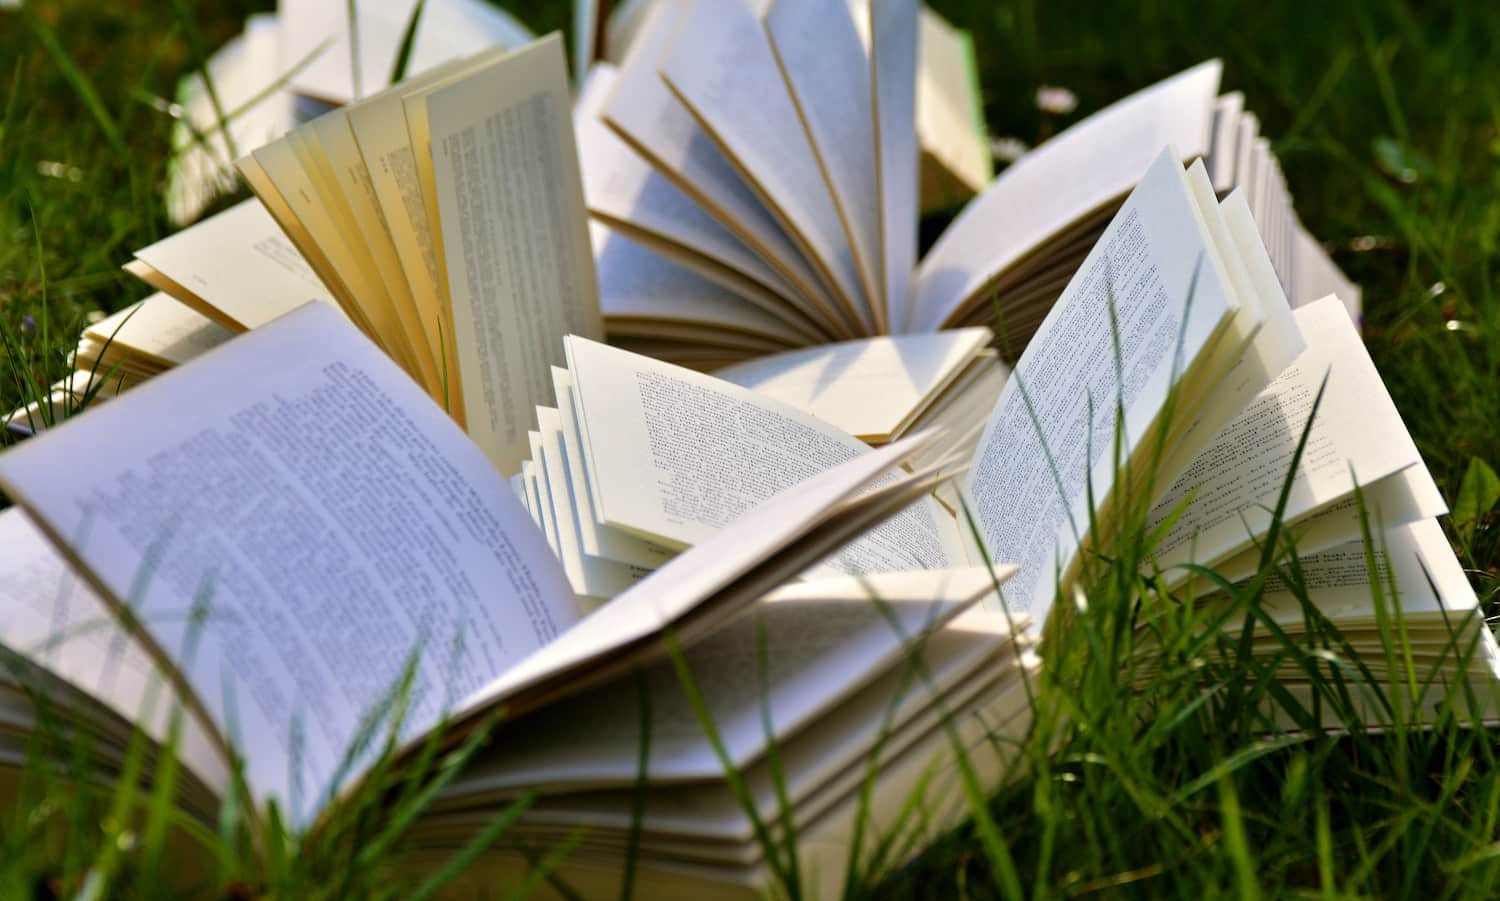 Food Tank is highlighting 21 books on food, agriculture, and environment to inspire readers of all ages to get in on the National Reading Month celebrations in 2019.